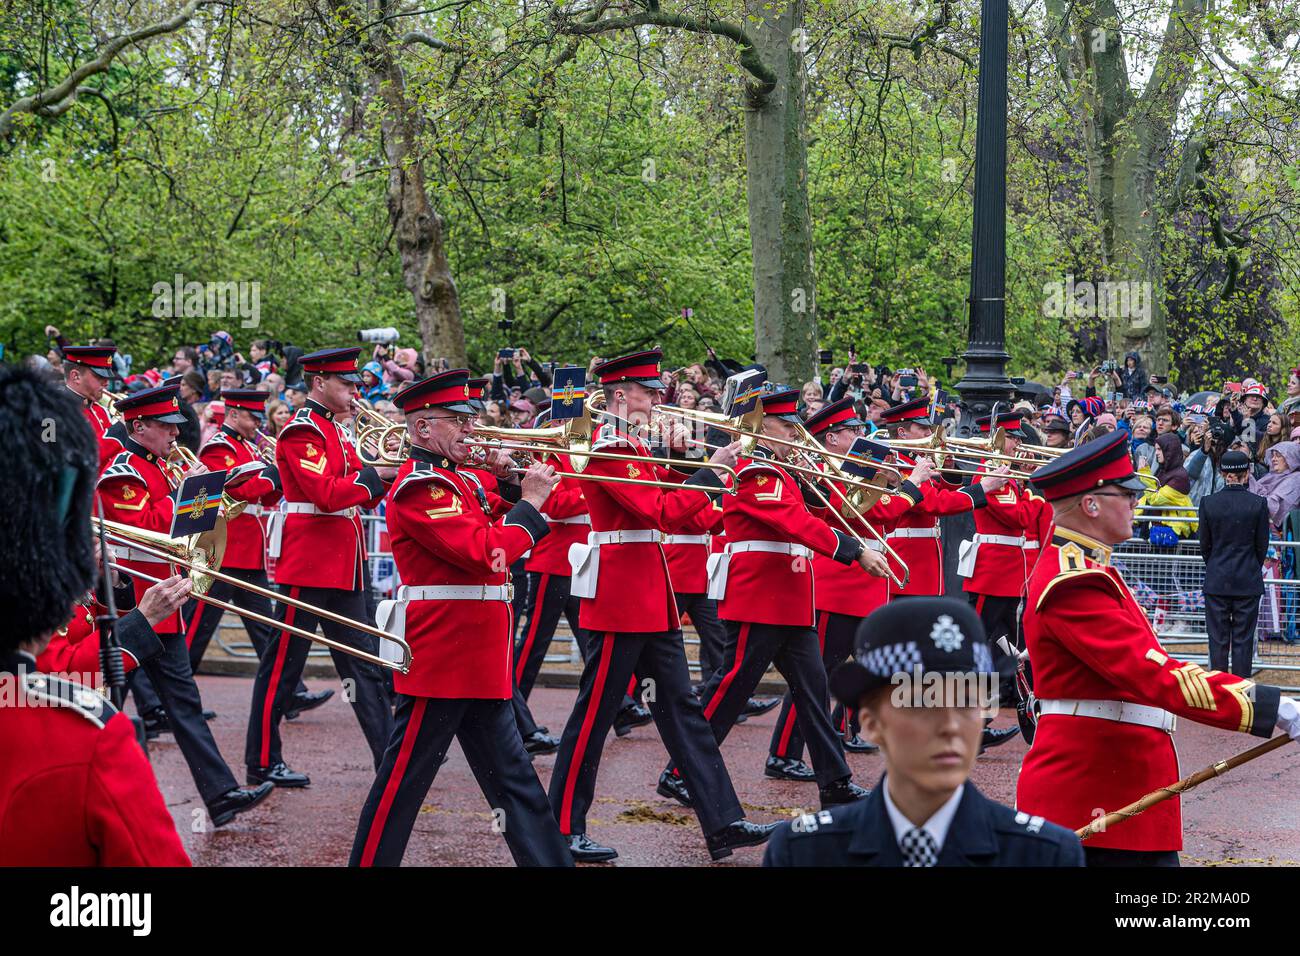 Marching military band for Coronation of King Charles III Stock Photo